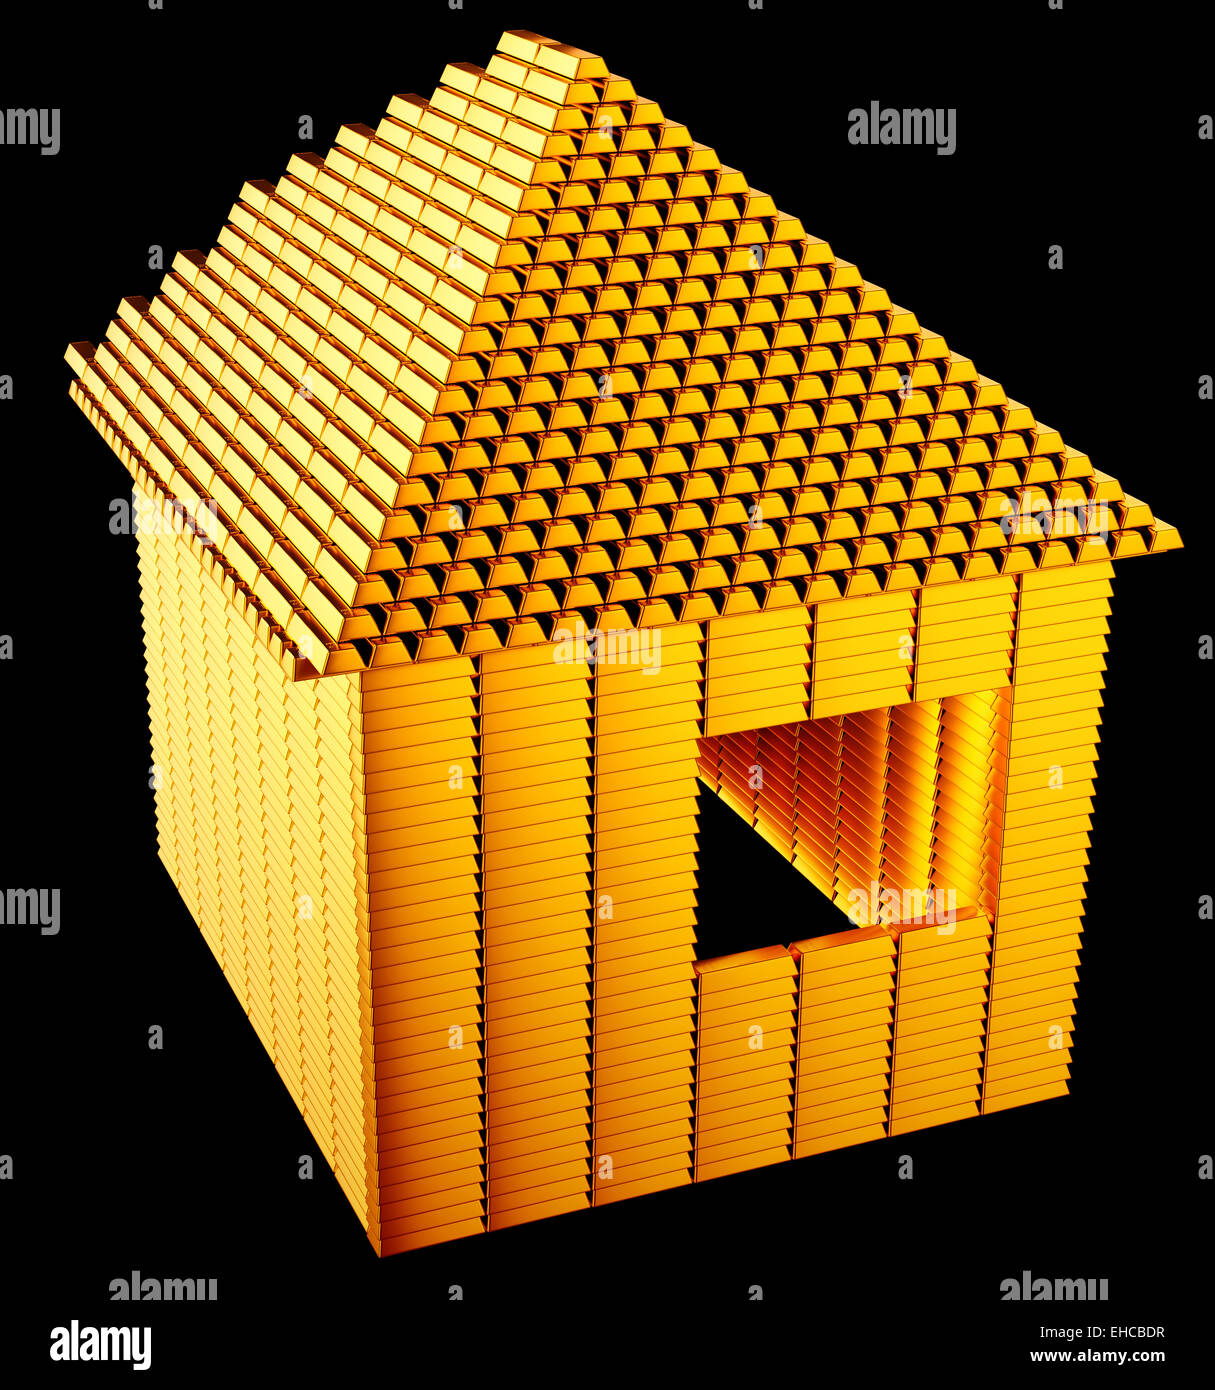 Expensive realty:: gold bars house shape over black Stock Photo